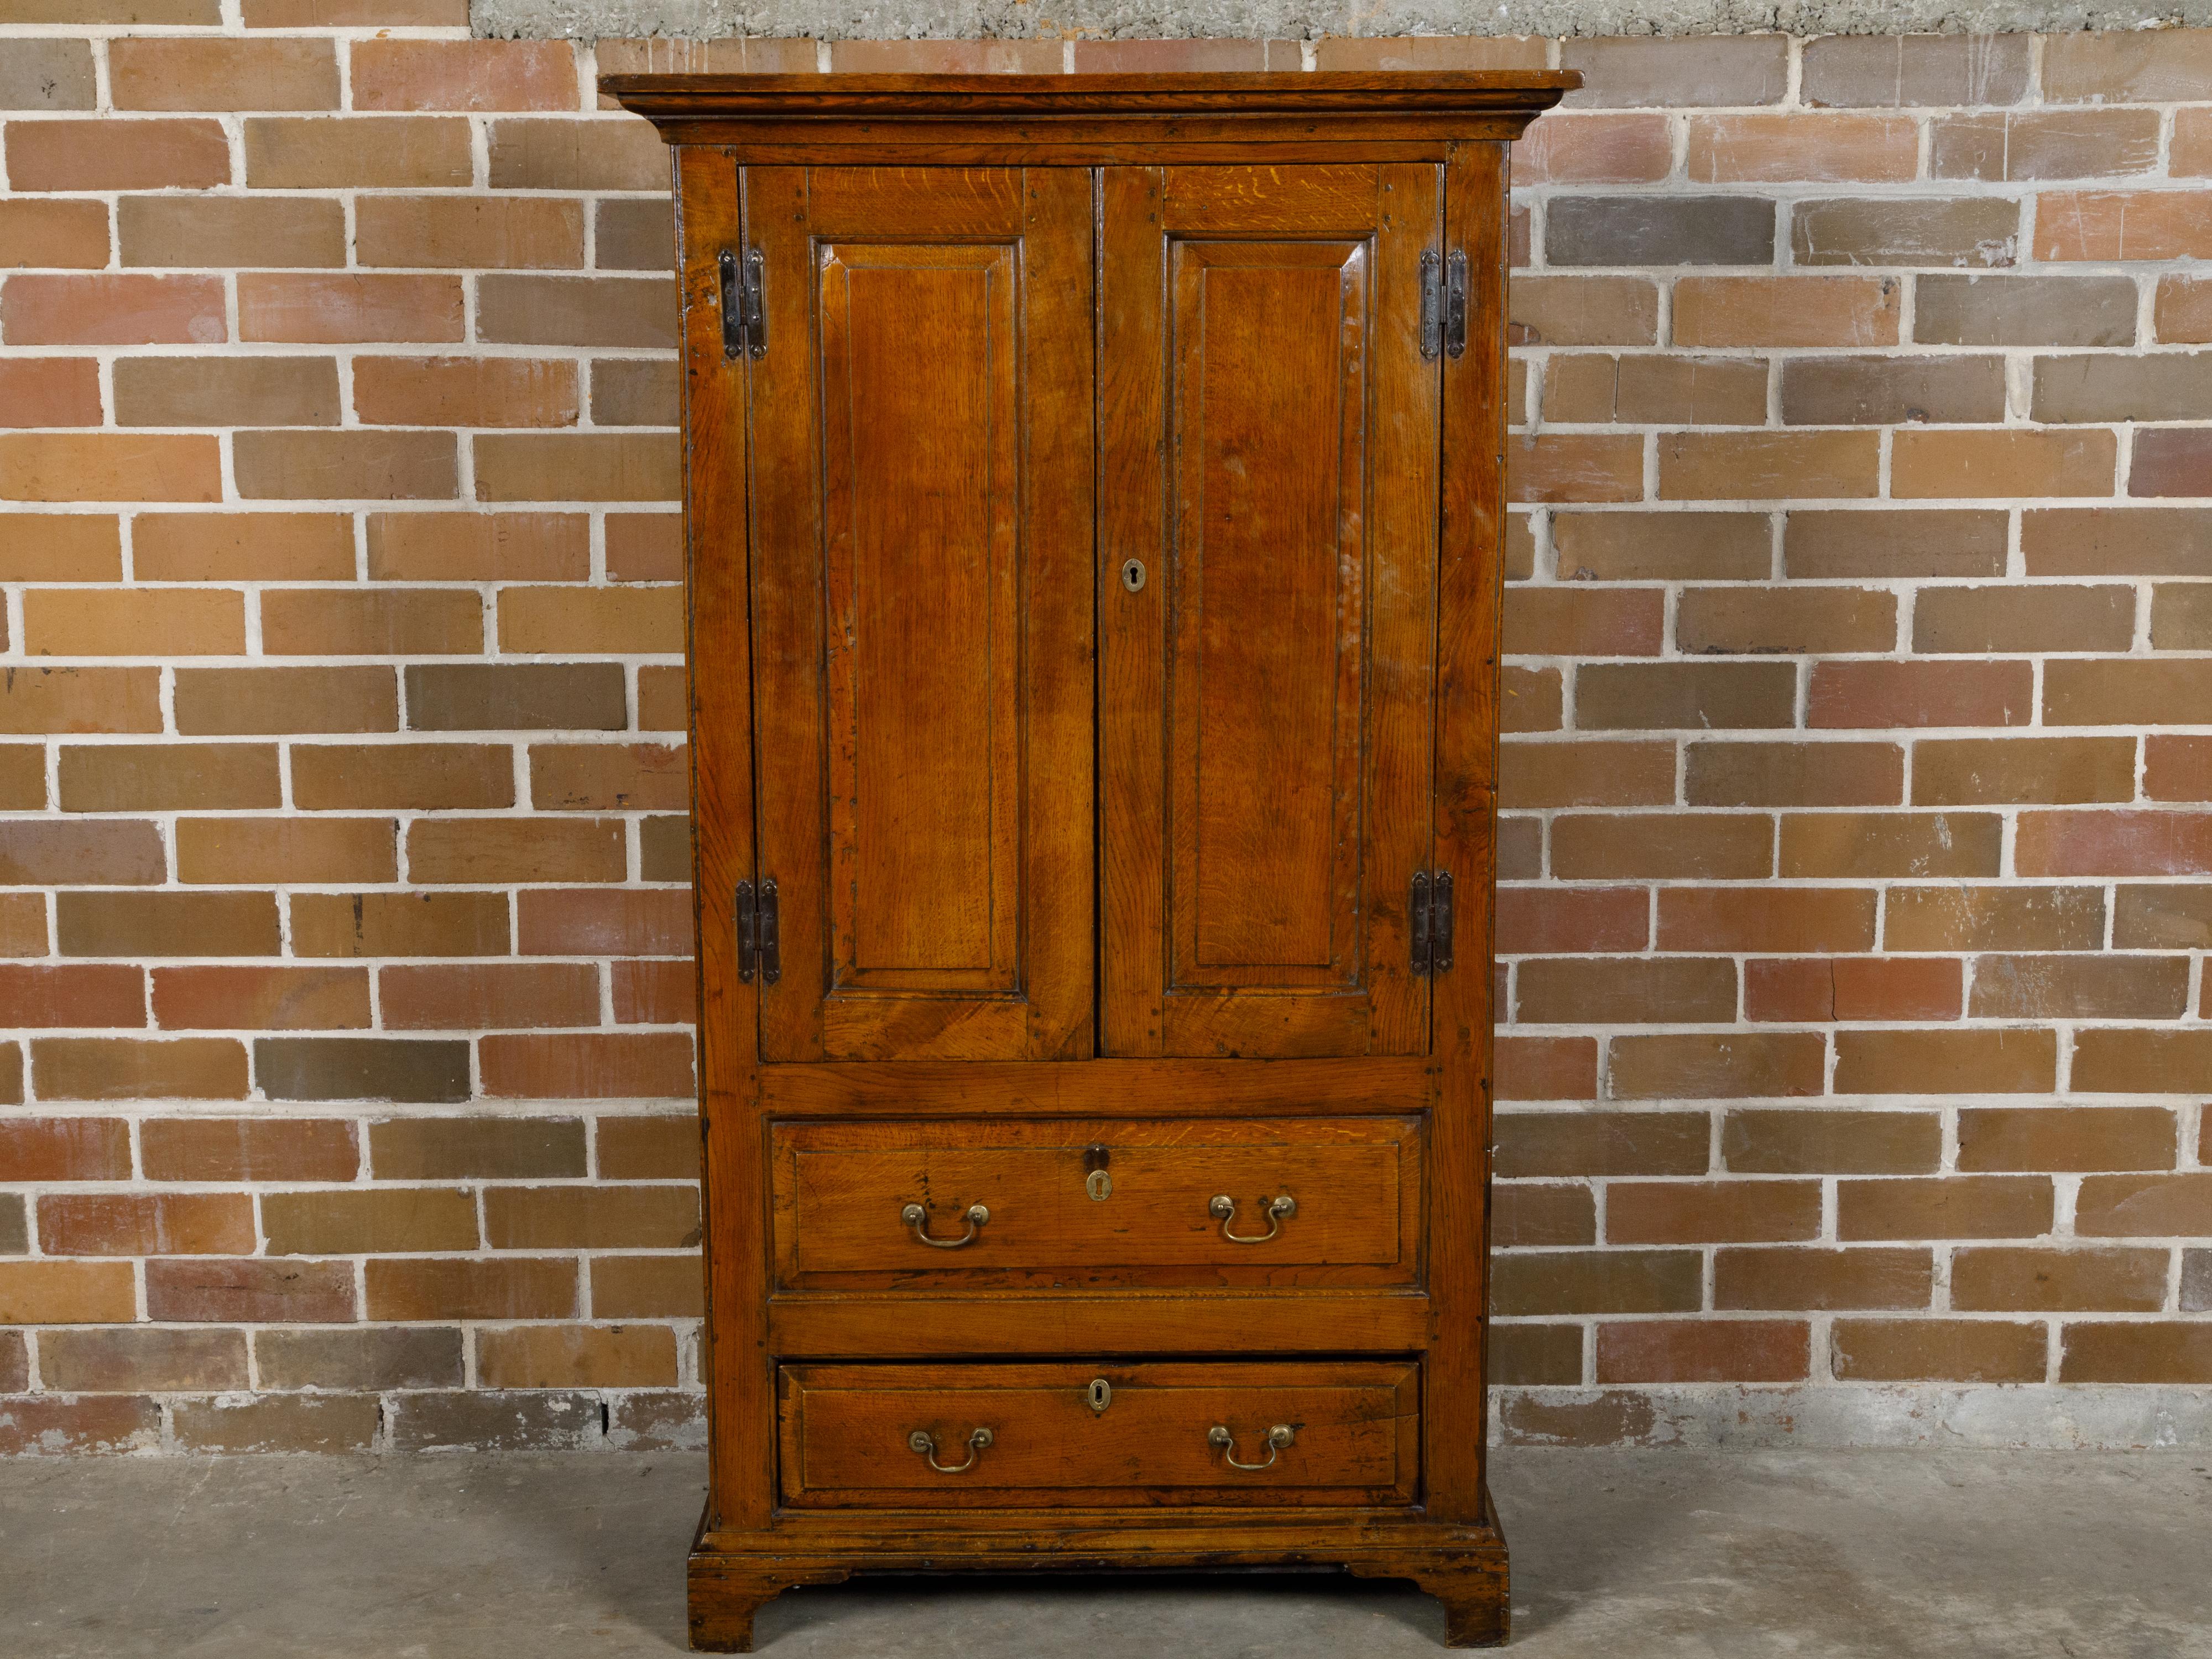 An English oak armoire from the 19th century with two doors over two drawers and bracket feet. This oak armoire, featuring two doors over two drawers and resting on sturdy bracket feet, is a testament to the durability and timeless appeal of classic